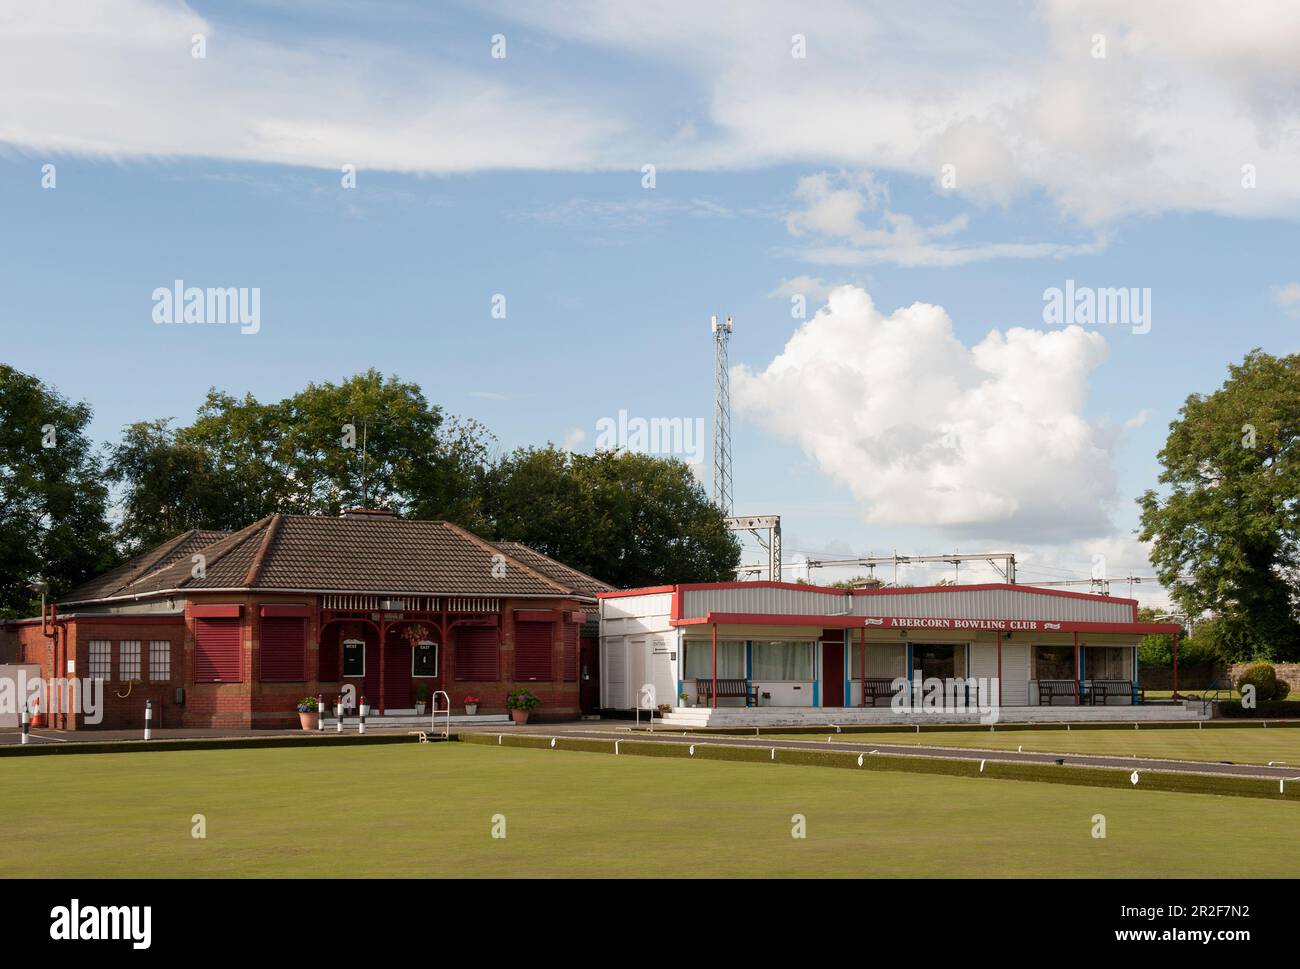 The pavilion of the Abercorn lawn bowling Green in Paisley, Scotland Stock Photo